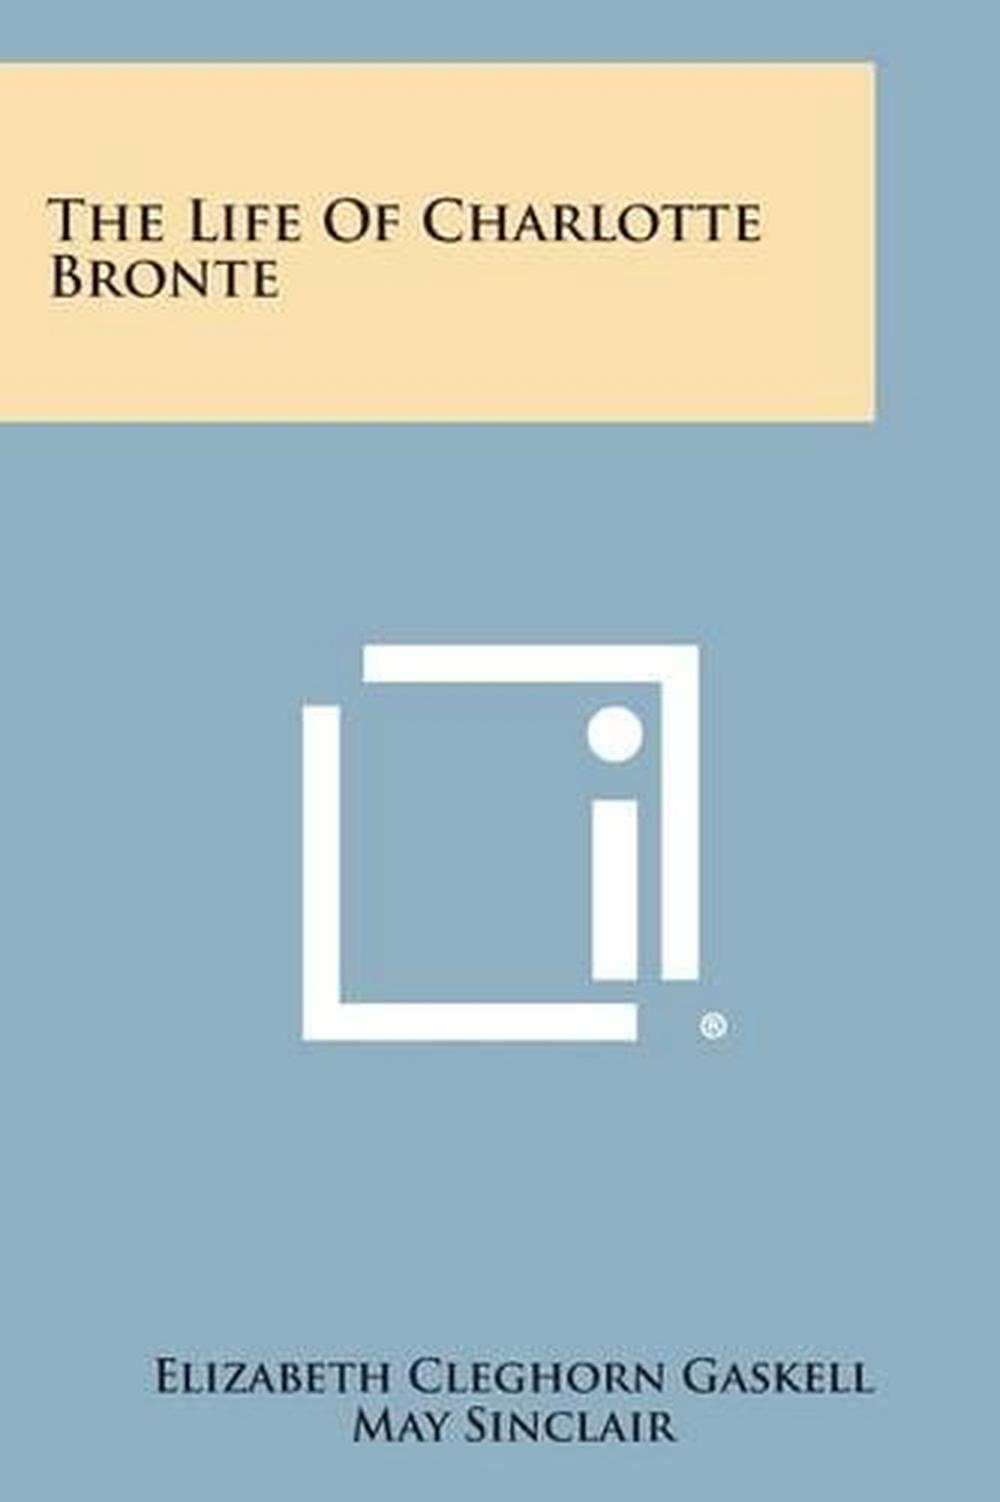 the life of charlotte bronte by elizabeth gaskell